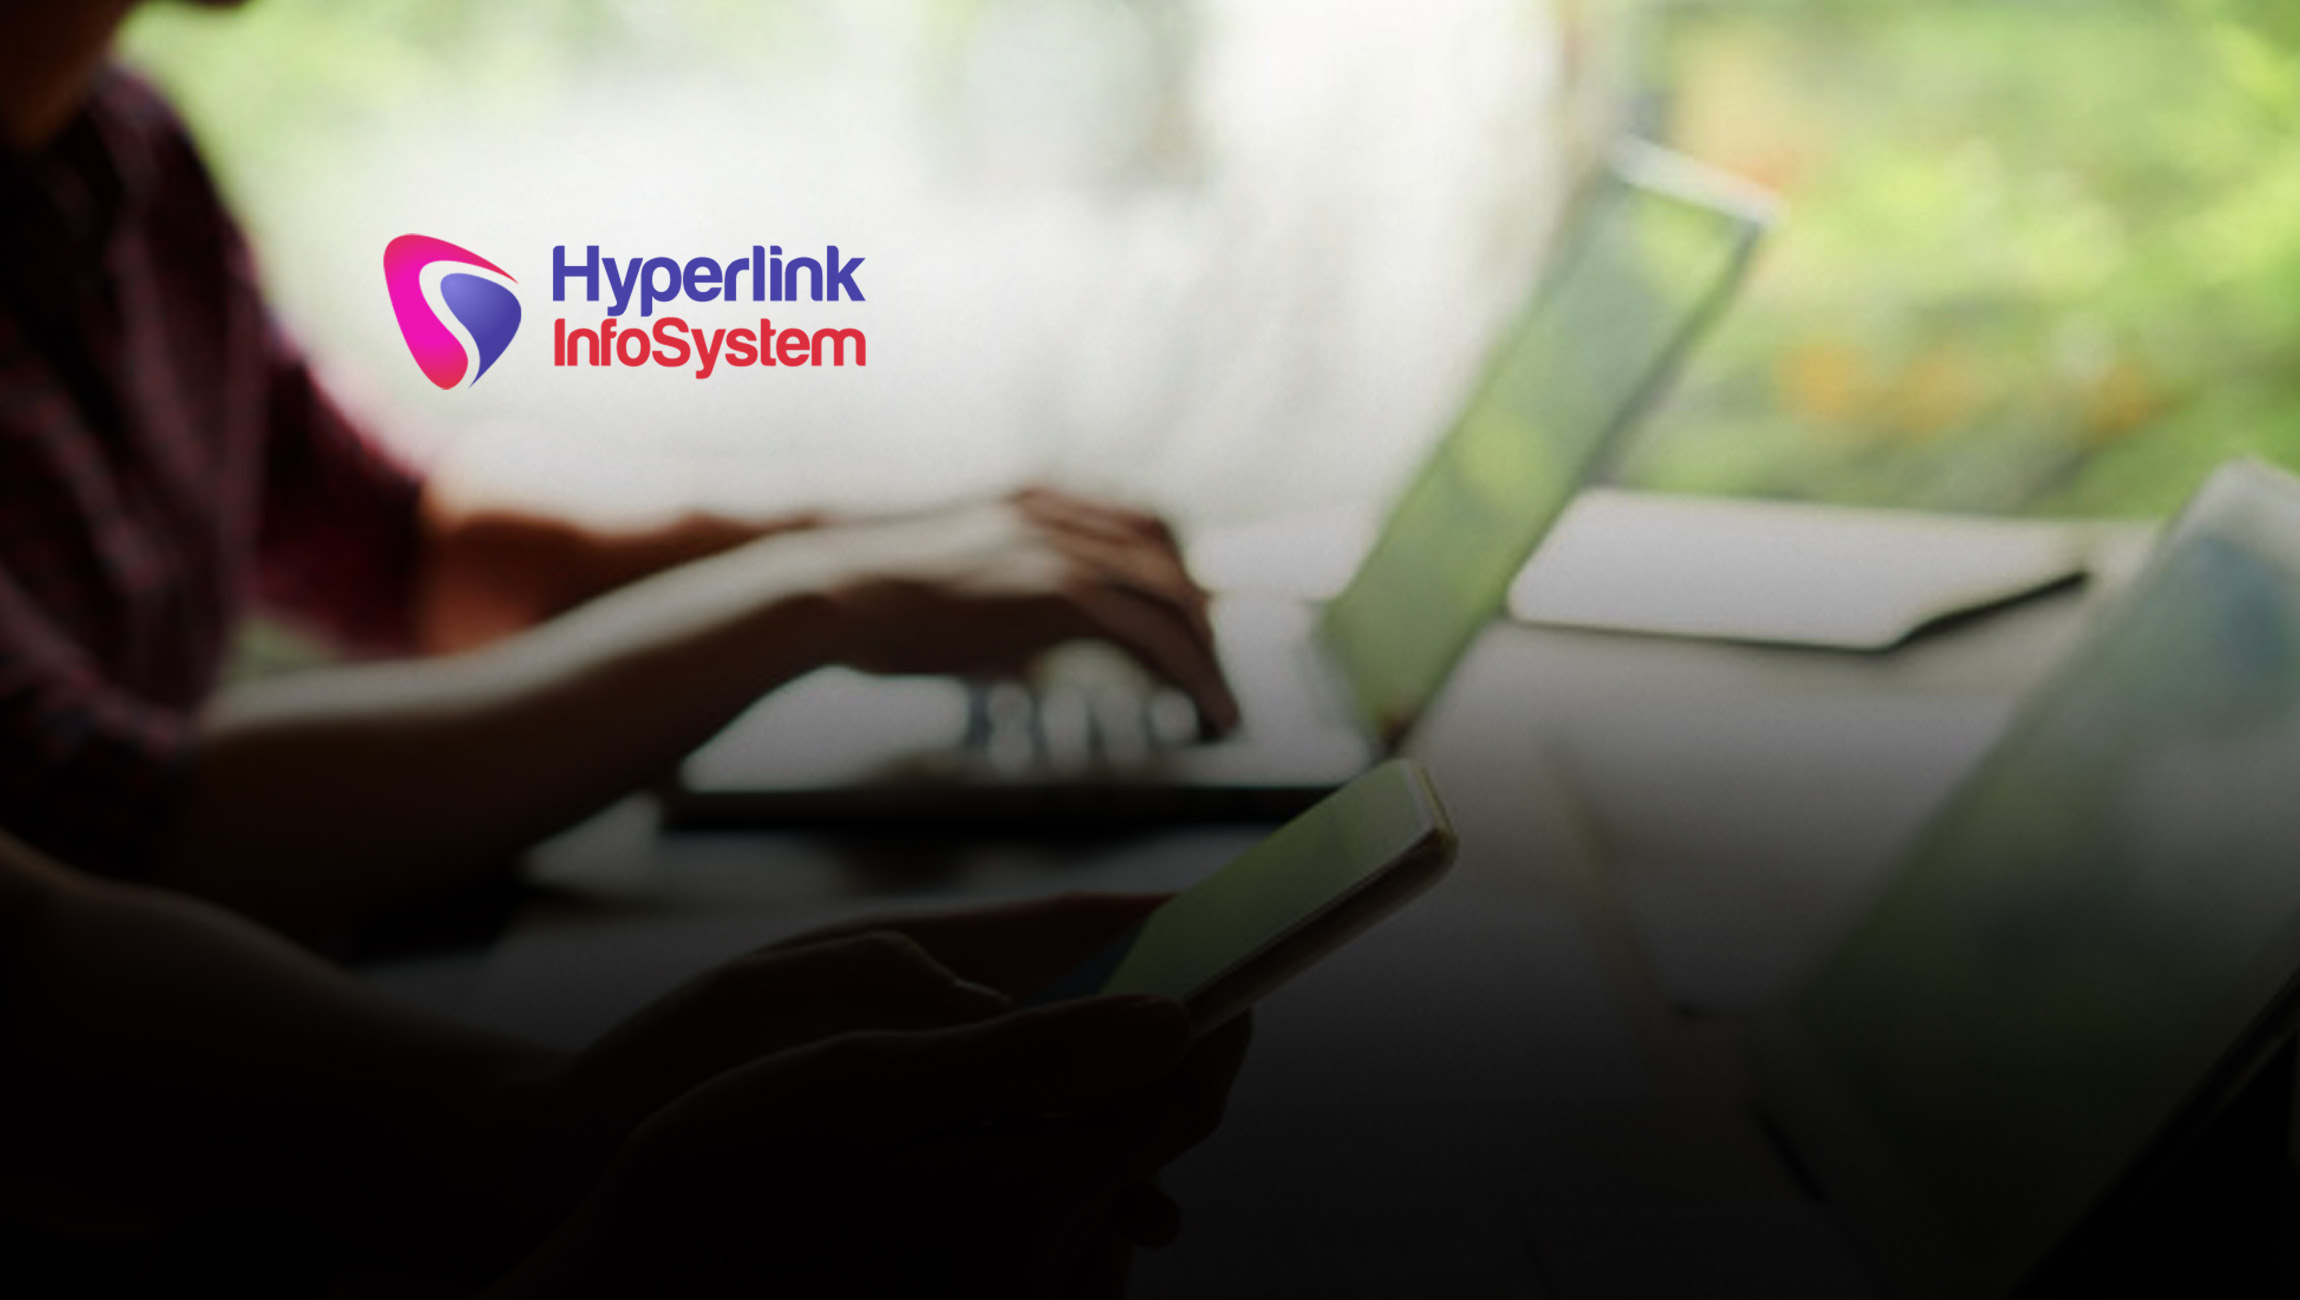 Leading App Development Company, Hyperlink InfoSystem Expands Sales operations in London With A Brand New Office Space In The Leadenhall Building